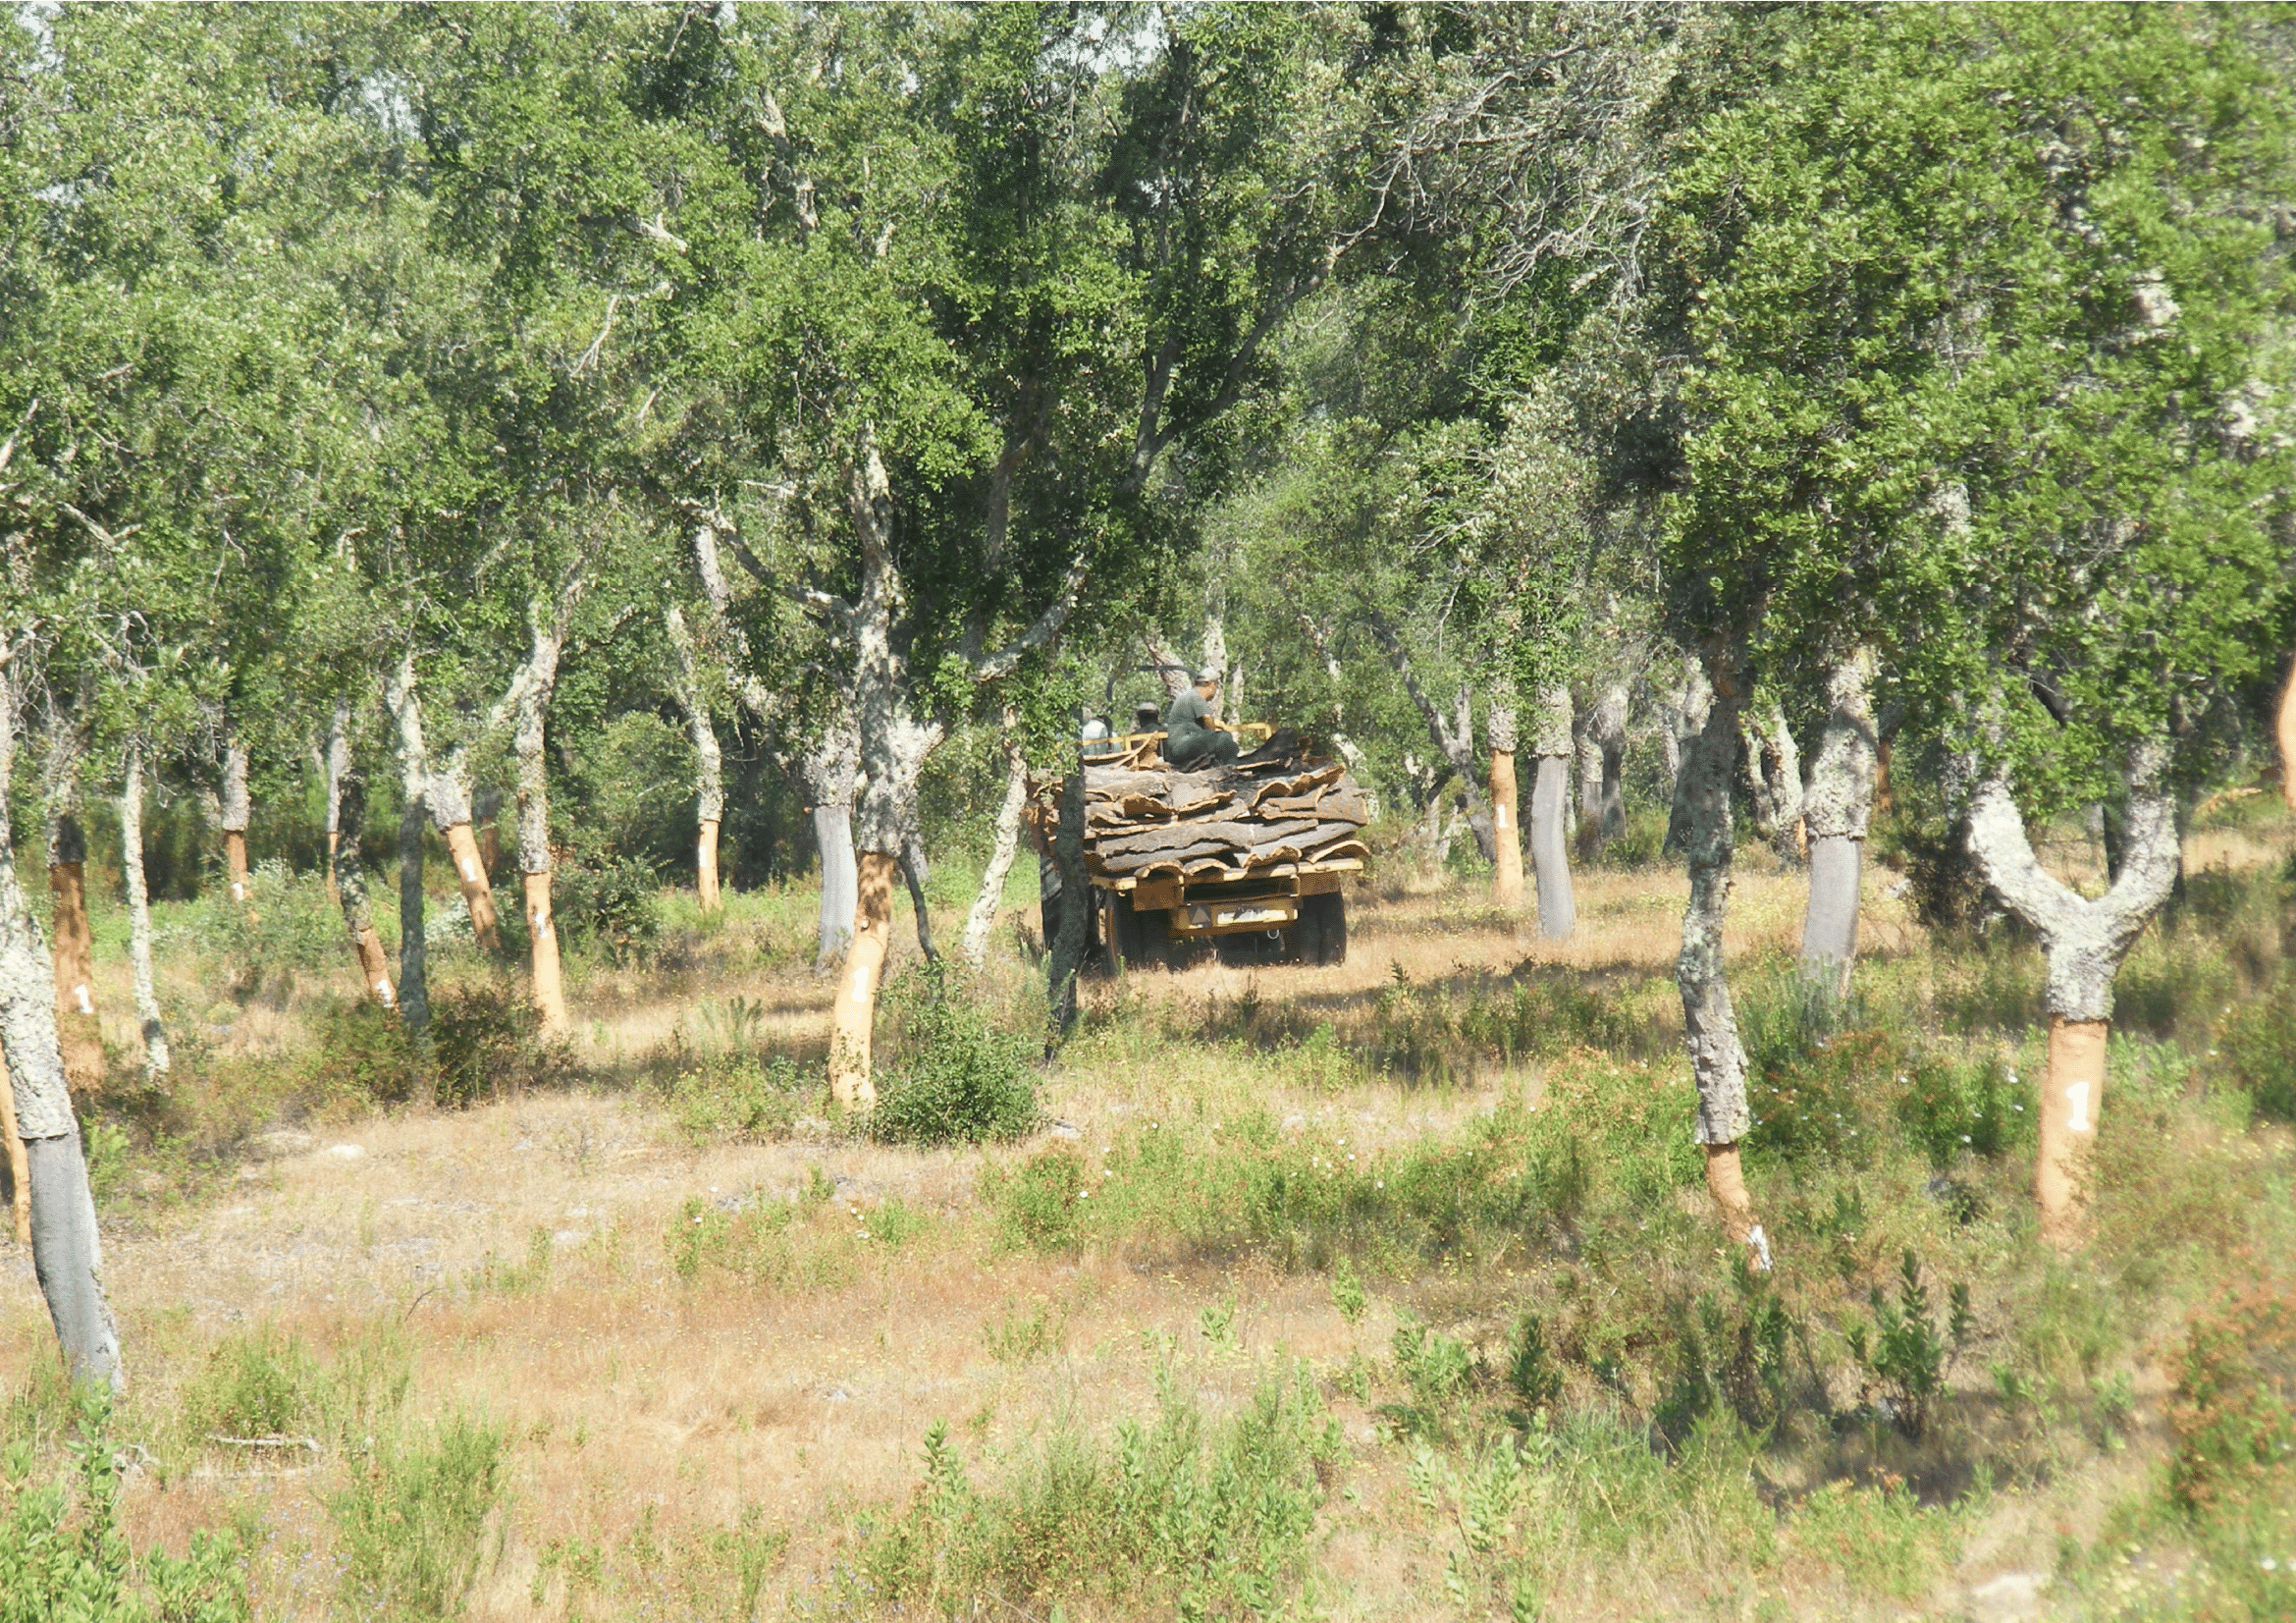 Cork oak woodlands have high biodiversity value and generate different ecosystem services of local, regional and global relevance. Cork harvesting are their main provisioning service Credit: Miguel Bugalho
